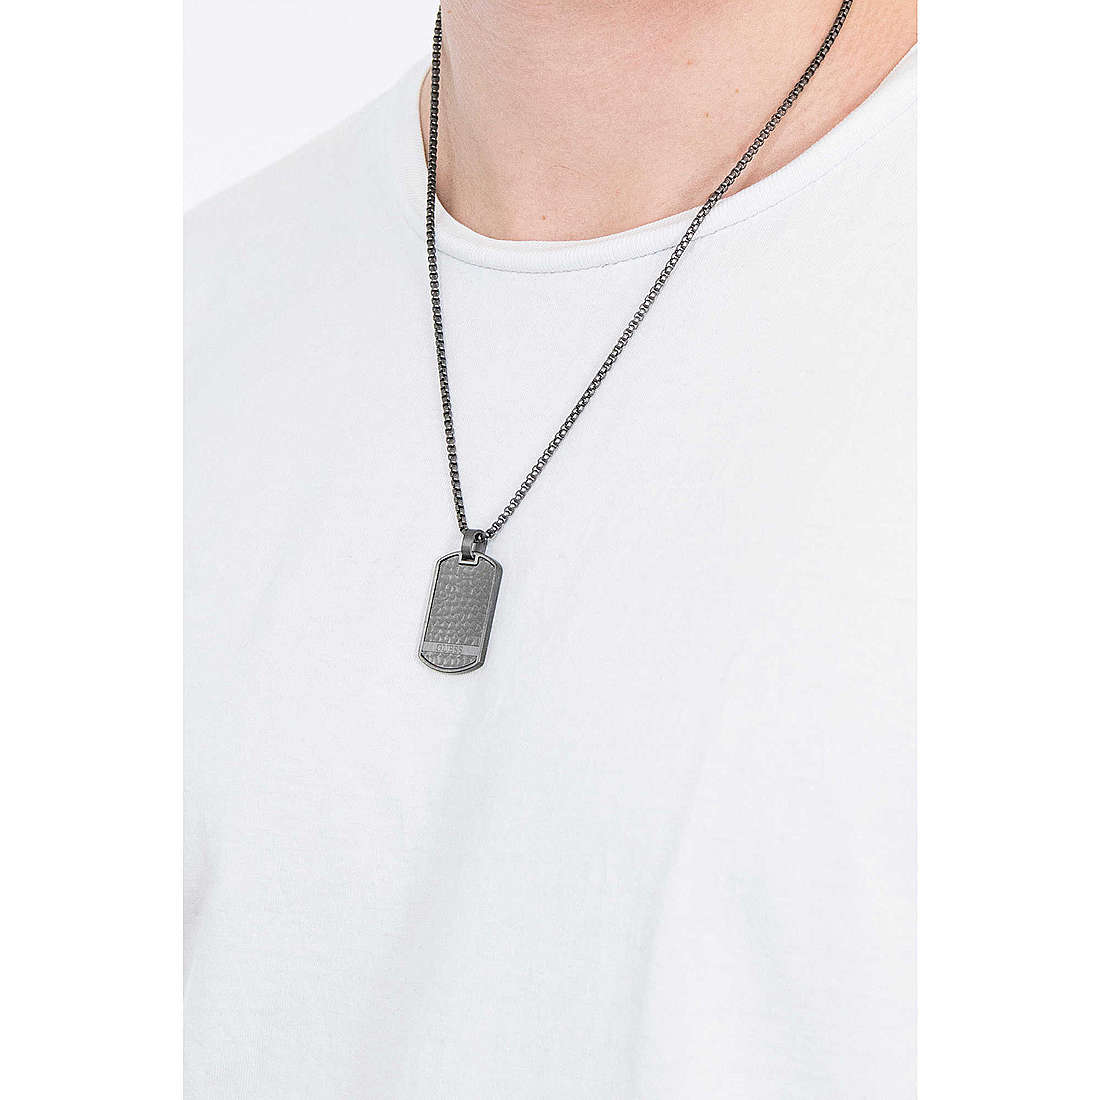 Guess necklaces man UMN29005 wearing